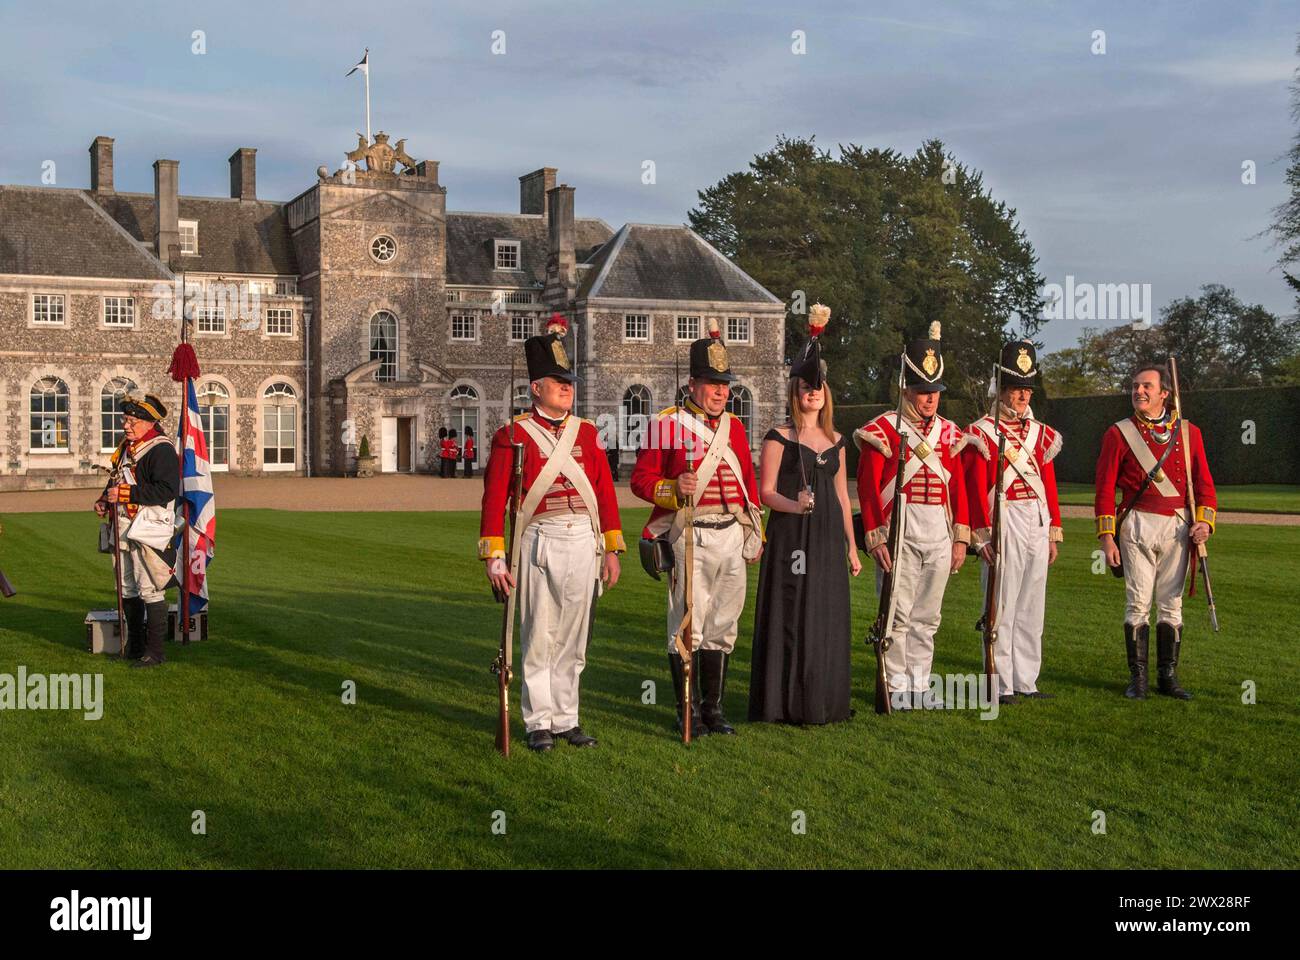 Country mansion British society wealth landed gentry private home Farleigh Wallop House, Farleigh Wallop, Hampshire. Lady Clementine Wallop with pretend weekend re-enactment soldier group. UK 2008 2000s HOMER SYKES Stock Photo